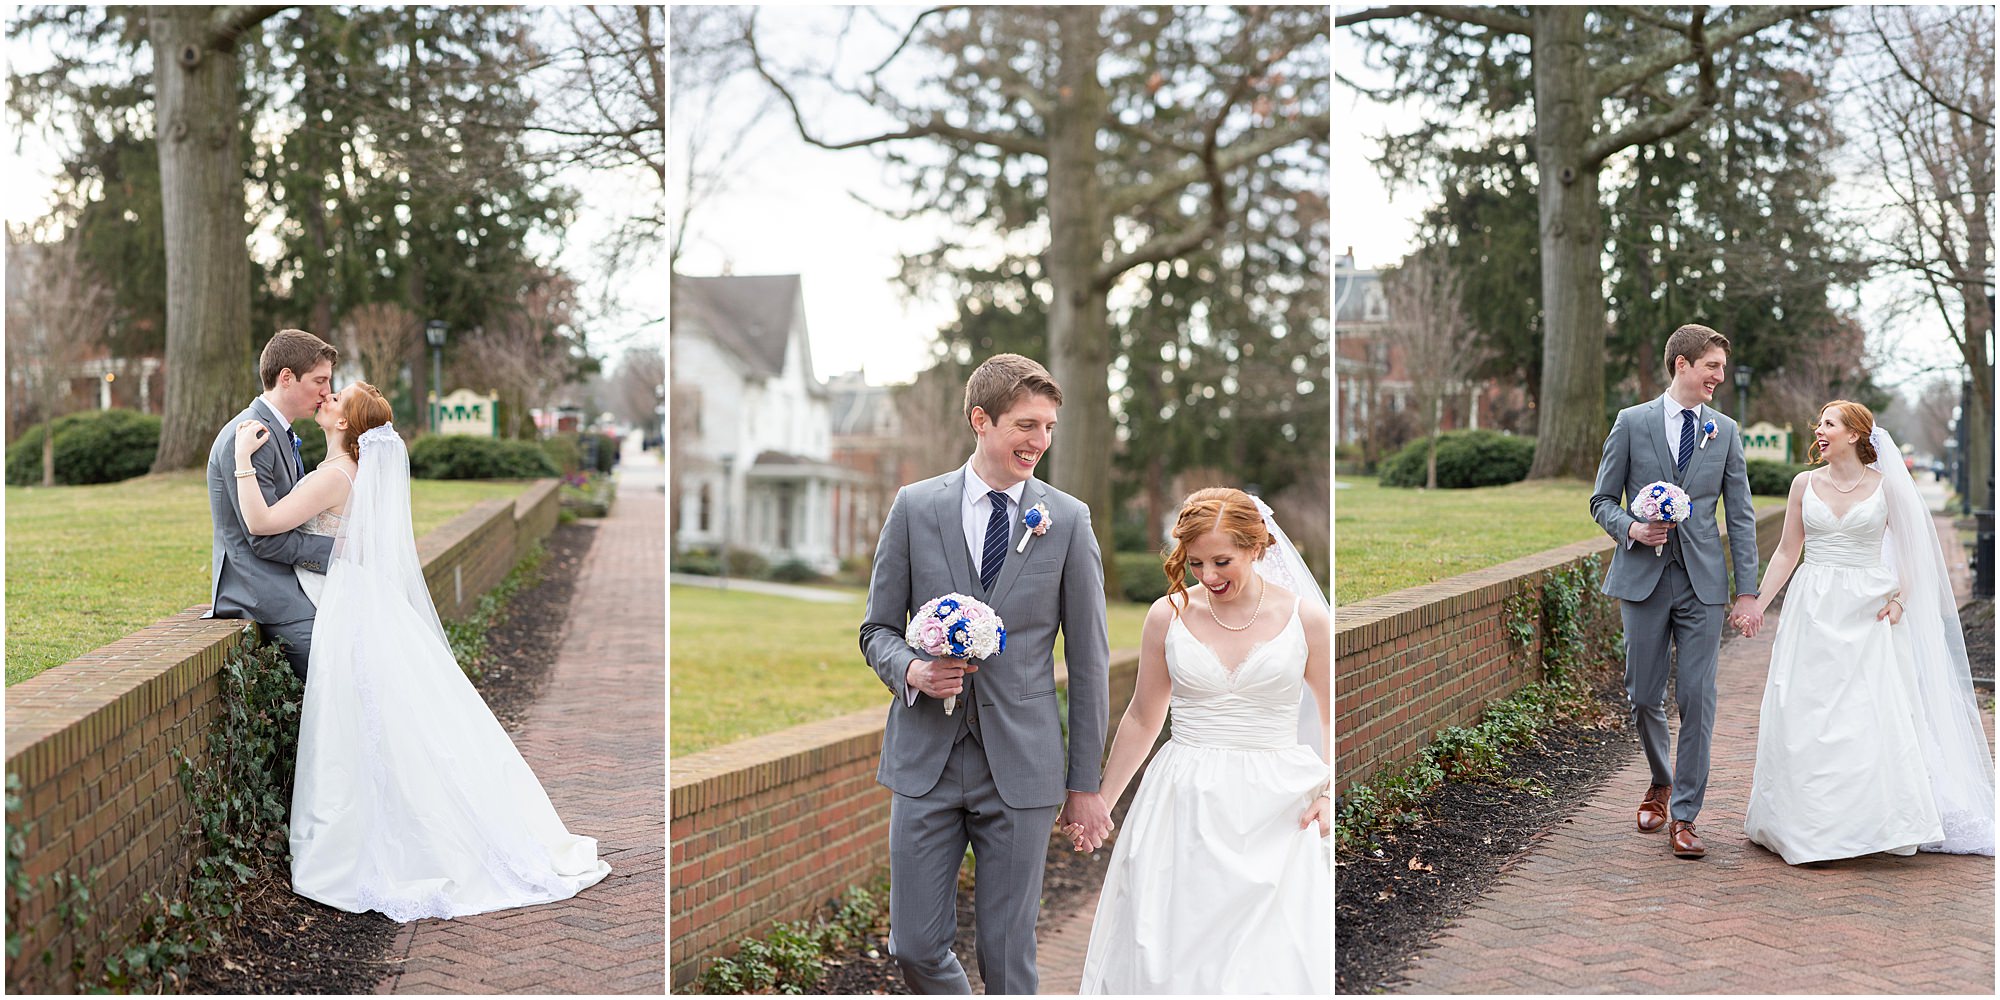 Classic wedding at the Moorestown Community House